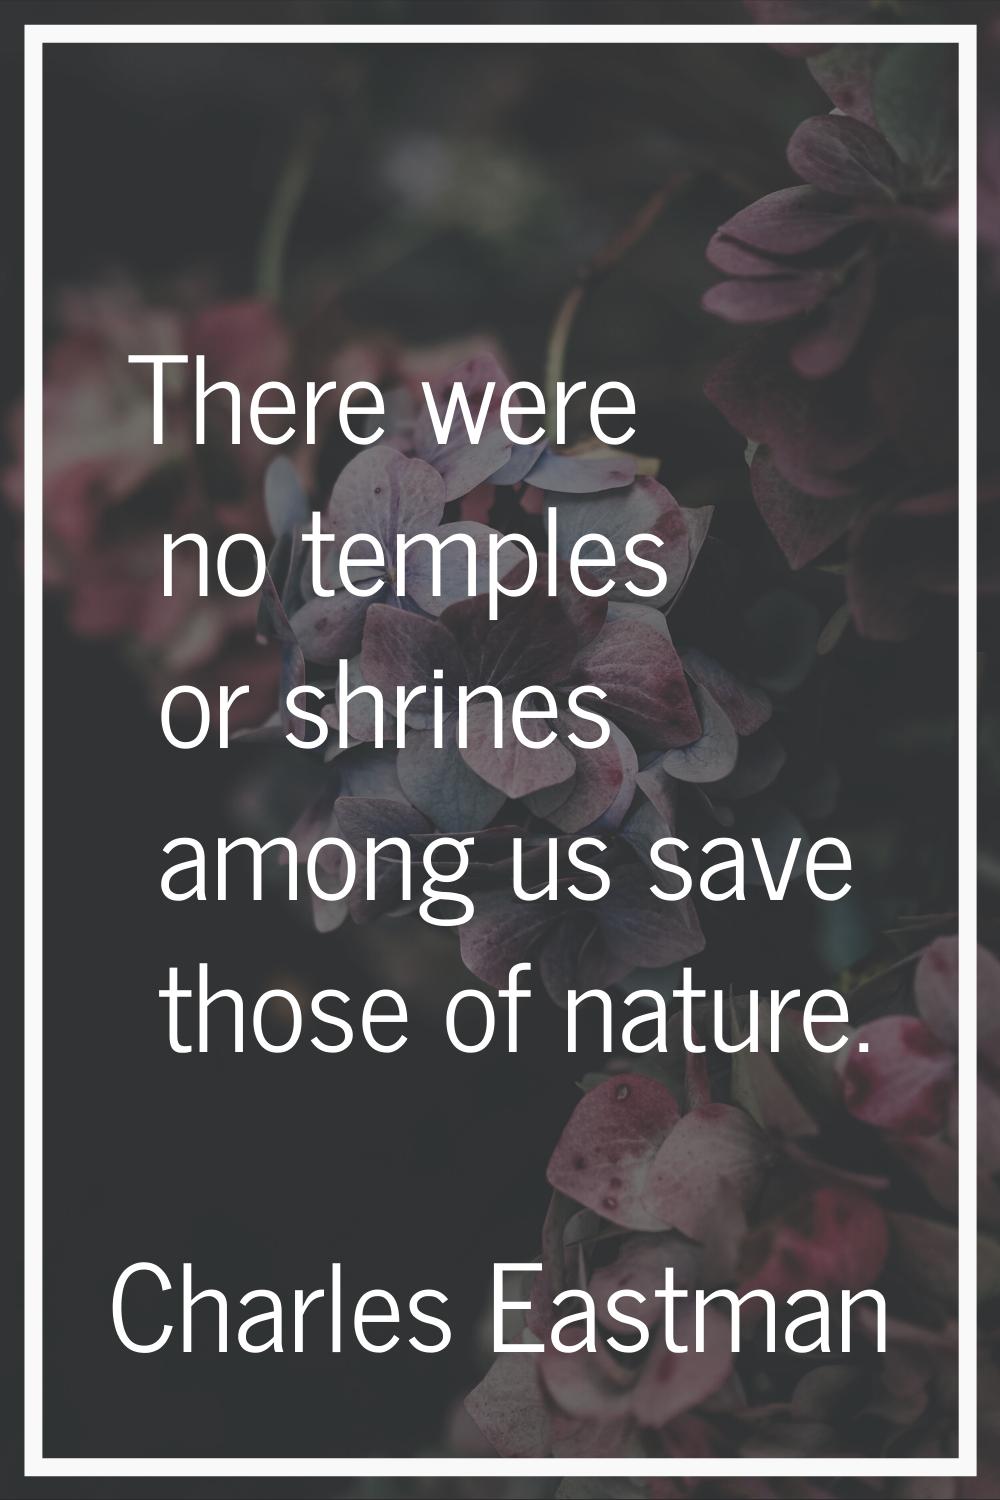 There were no temples or shrines among us save those of nature.